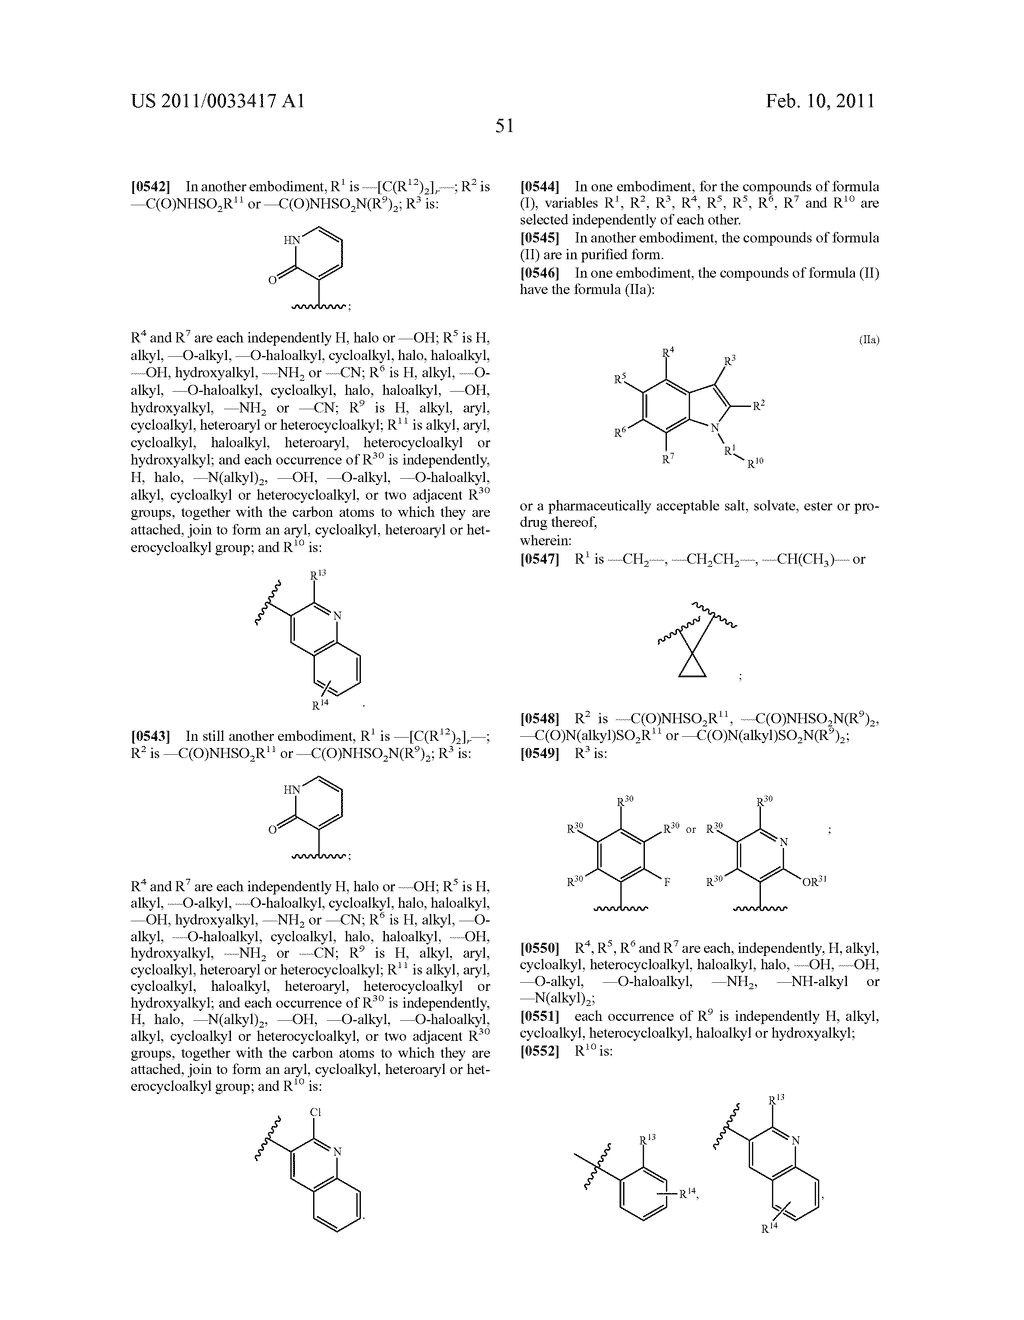 2,3-SUBSTITUTED INDOLE DERIVATIVES FOR TREATING VIRAL INFECTIONS - diagram, schematic, and image 52